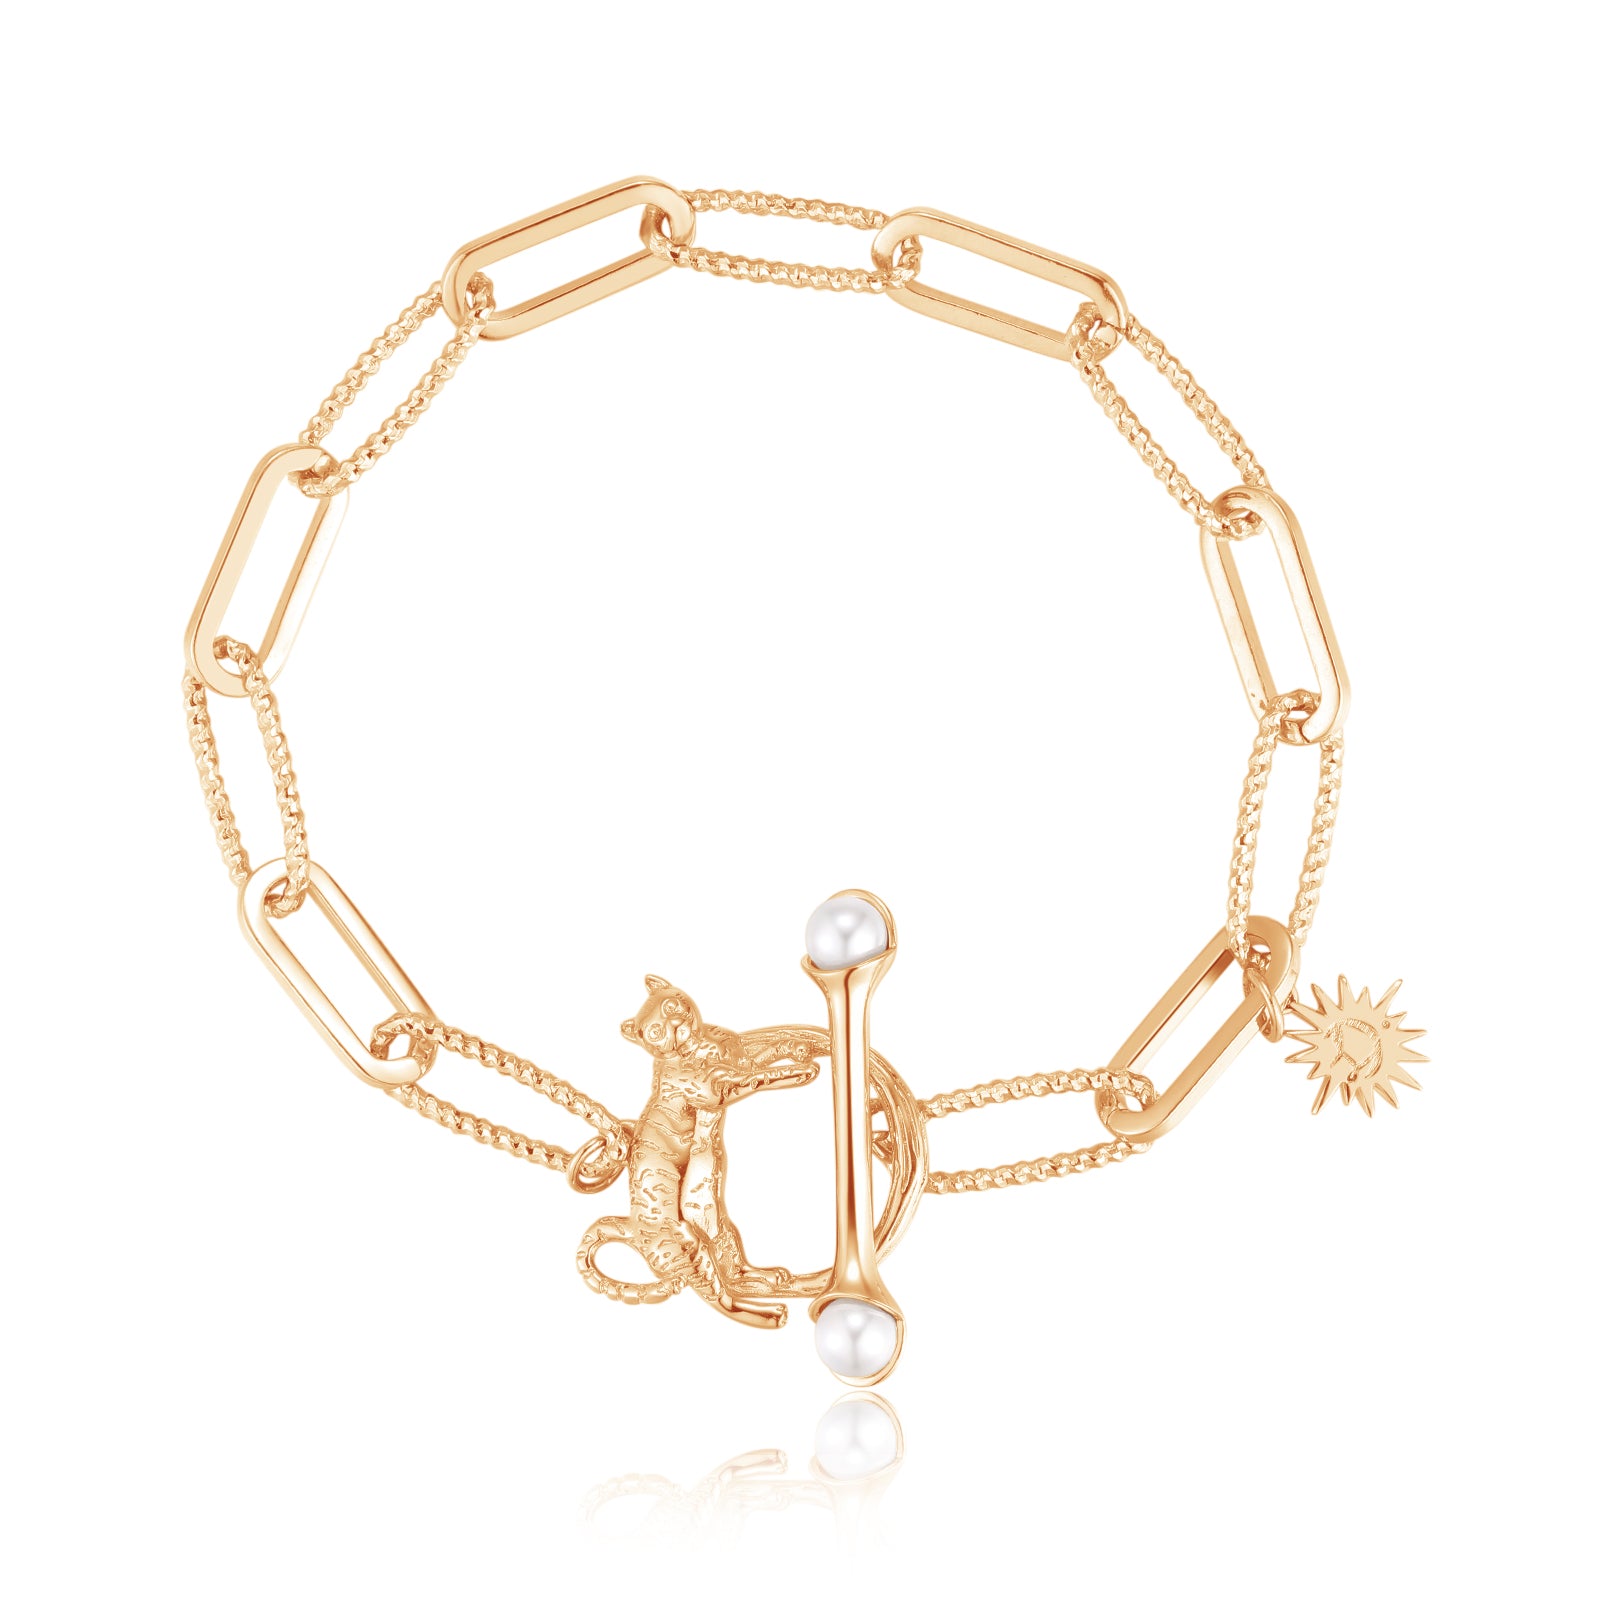 Cynthia x Love by the Moon - Gold Cat Toggle Bracelet